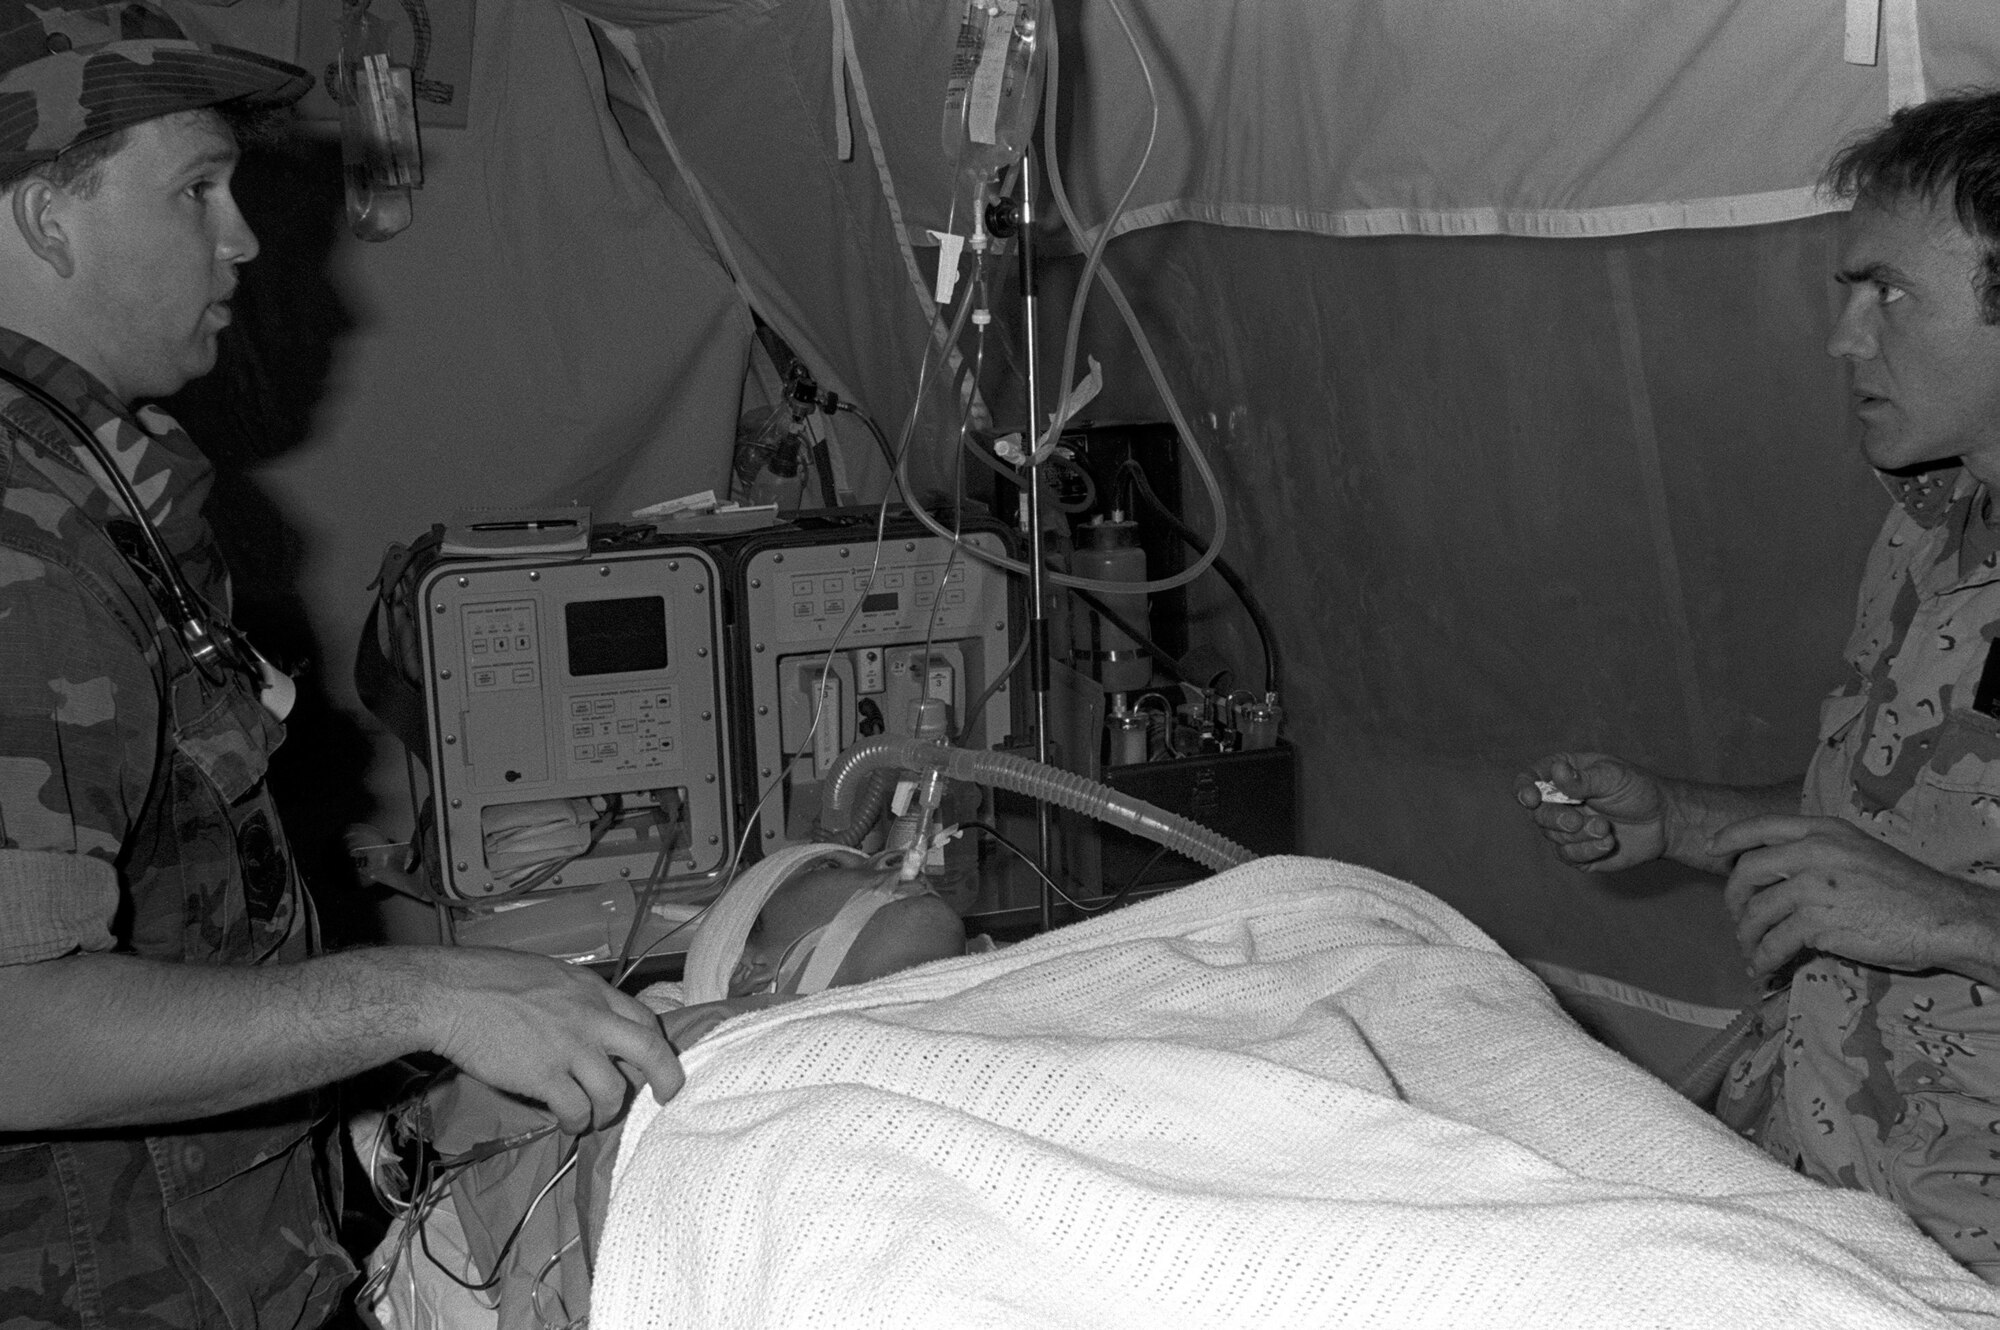 Medical personnel prepare Corporal Richard Ramirez, a member of the 1st Marine Division, for medical evacuation by a C-141B Starlifter aircraft from Al-Jubail Airport to Germany for treatment of chest wounds sustained during Operation DESERT STORM. During this time, Aeromedical Evacuation teams were prepared and were able to transport up to 3,600 casualties a day. (U.S. Air Force photo)